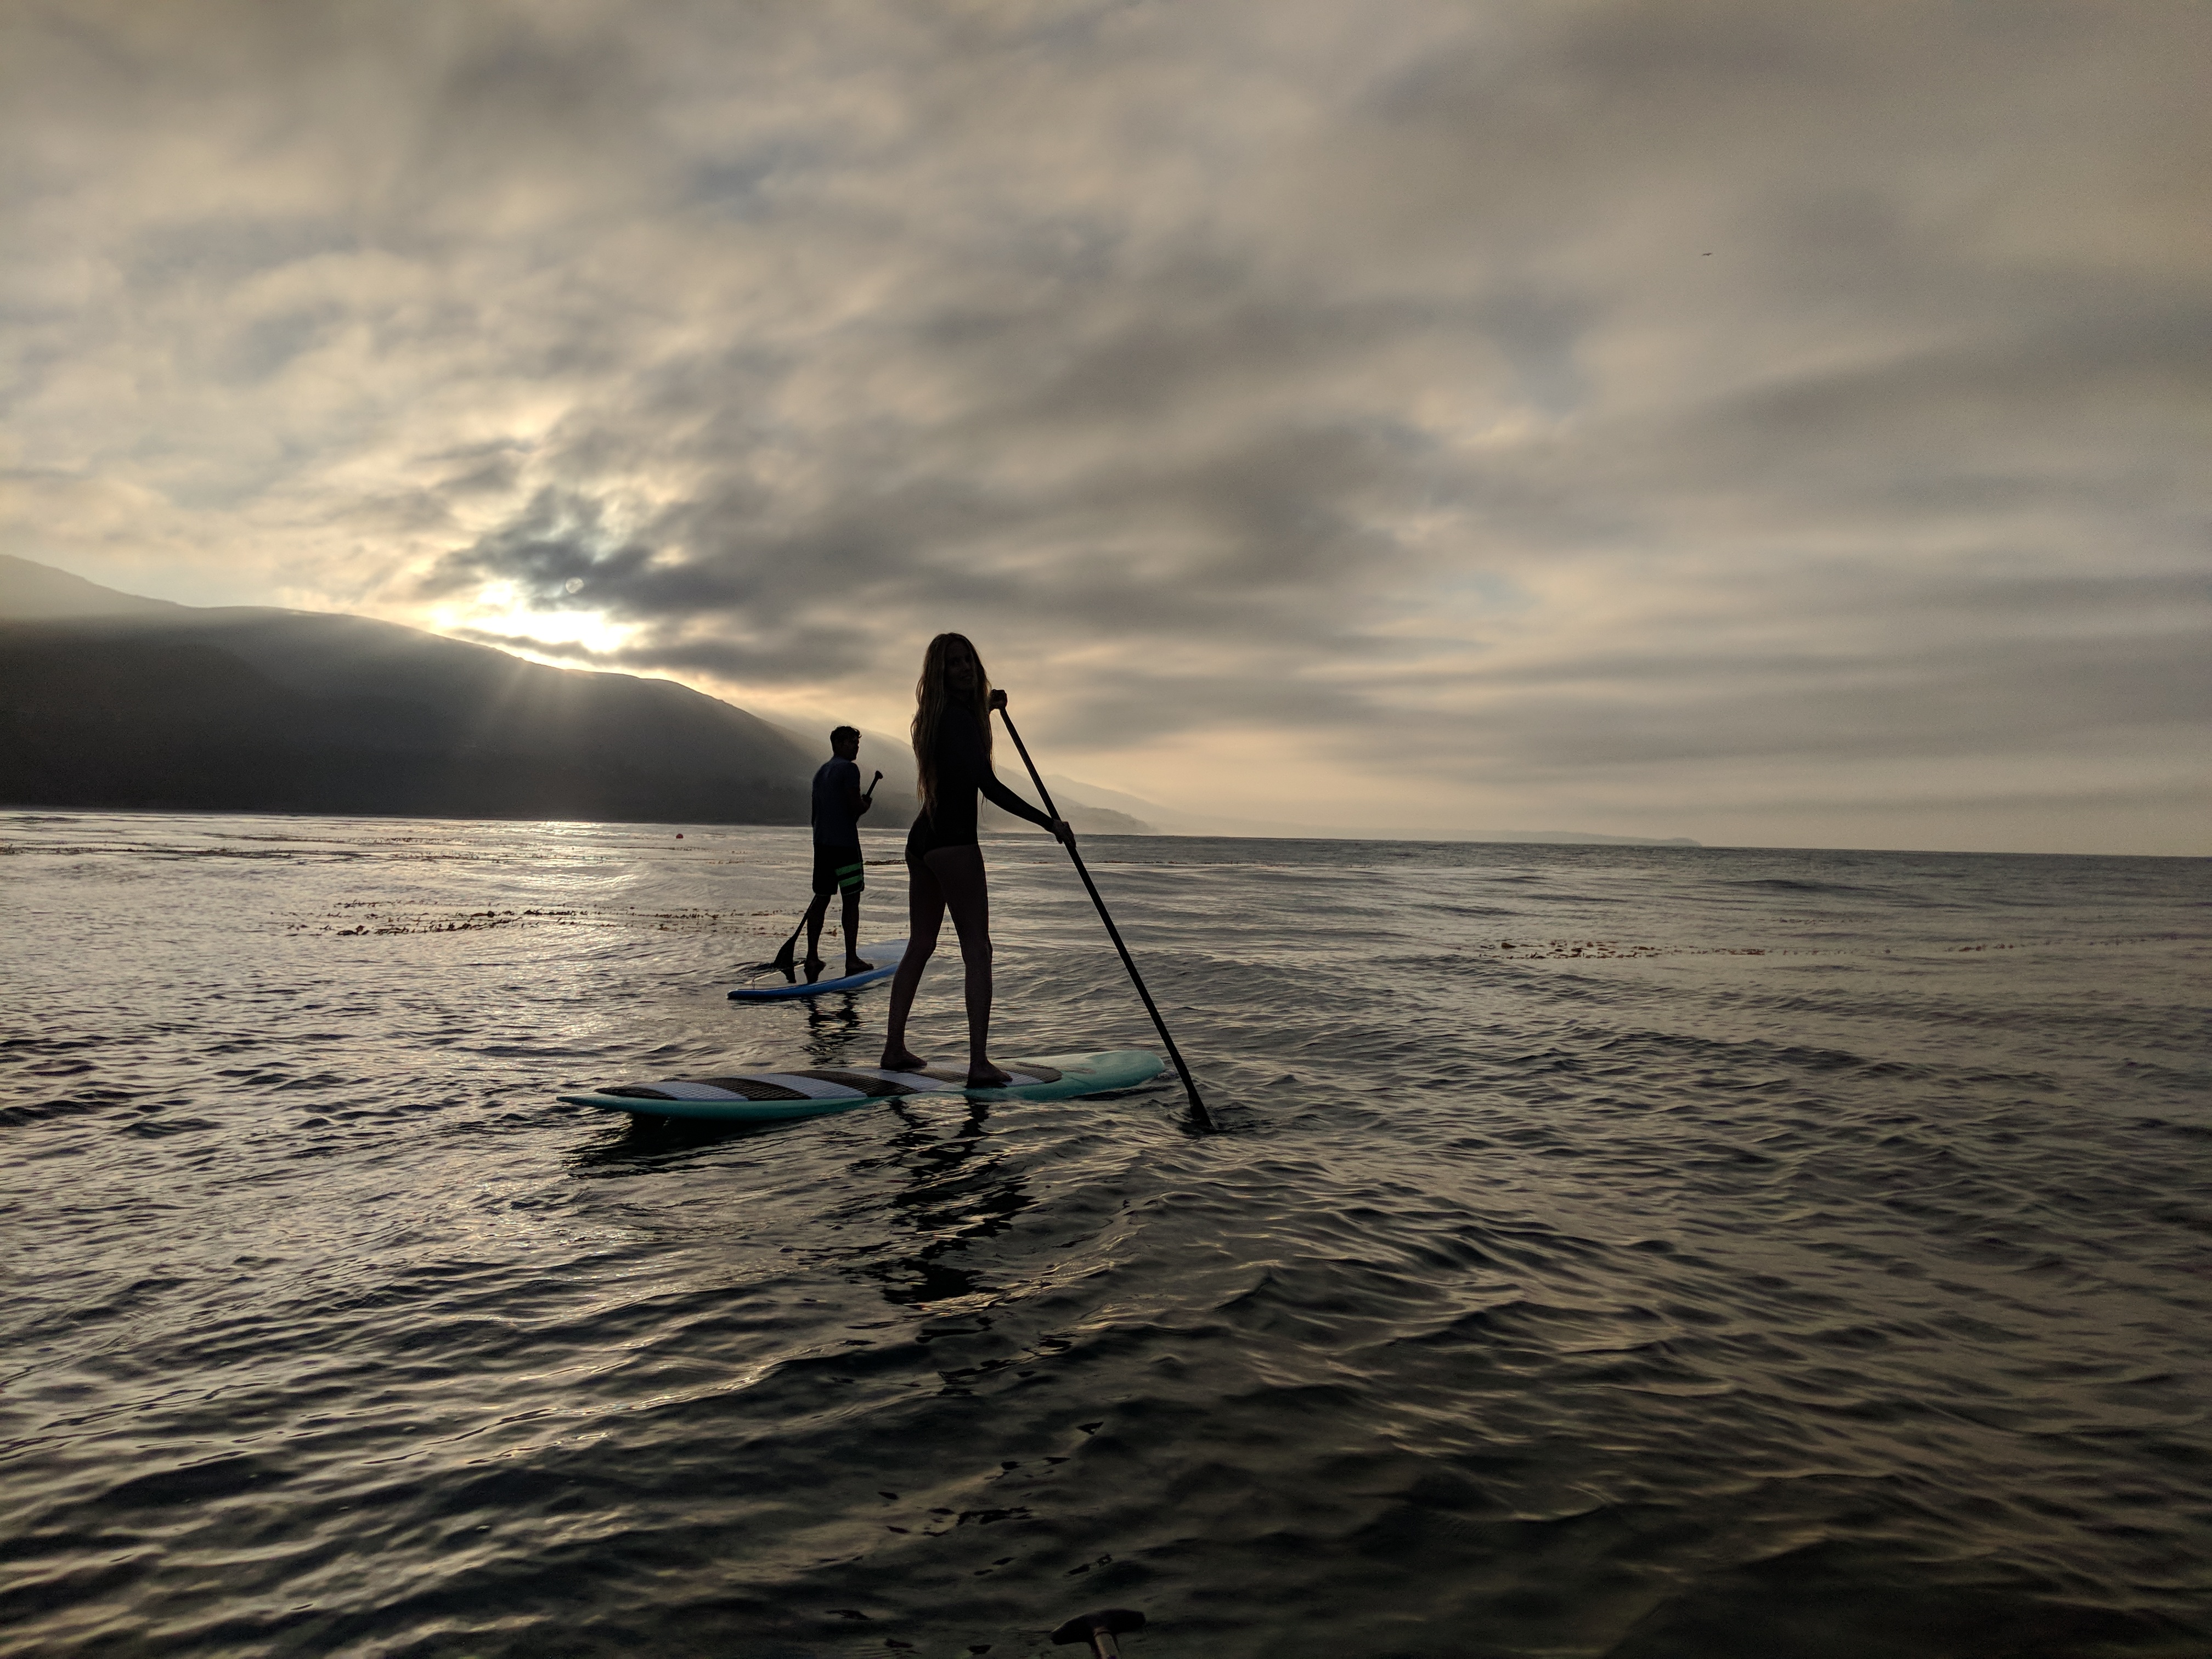 People 4032x3024 sky sea standing sunset clouds surfboards horizon paddleboard paddleboarding women outdoors paddles women sunlight water low light